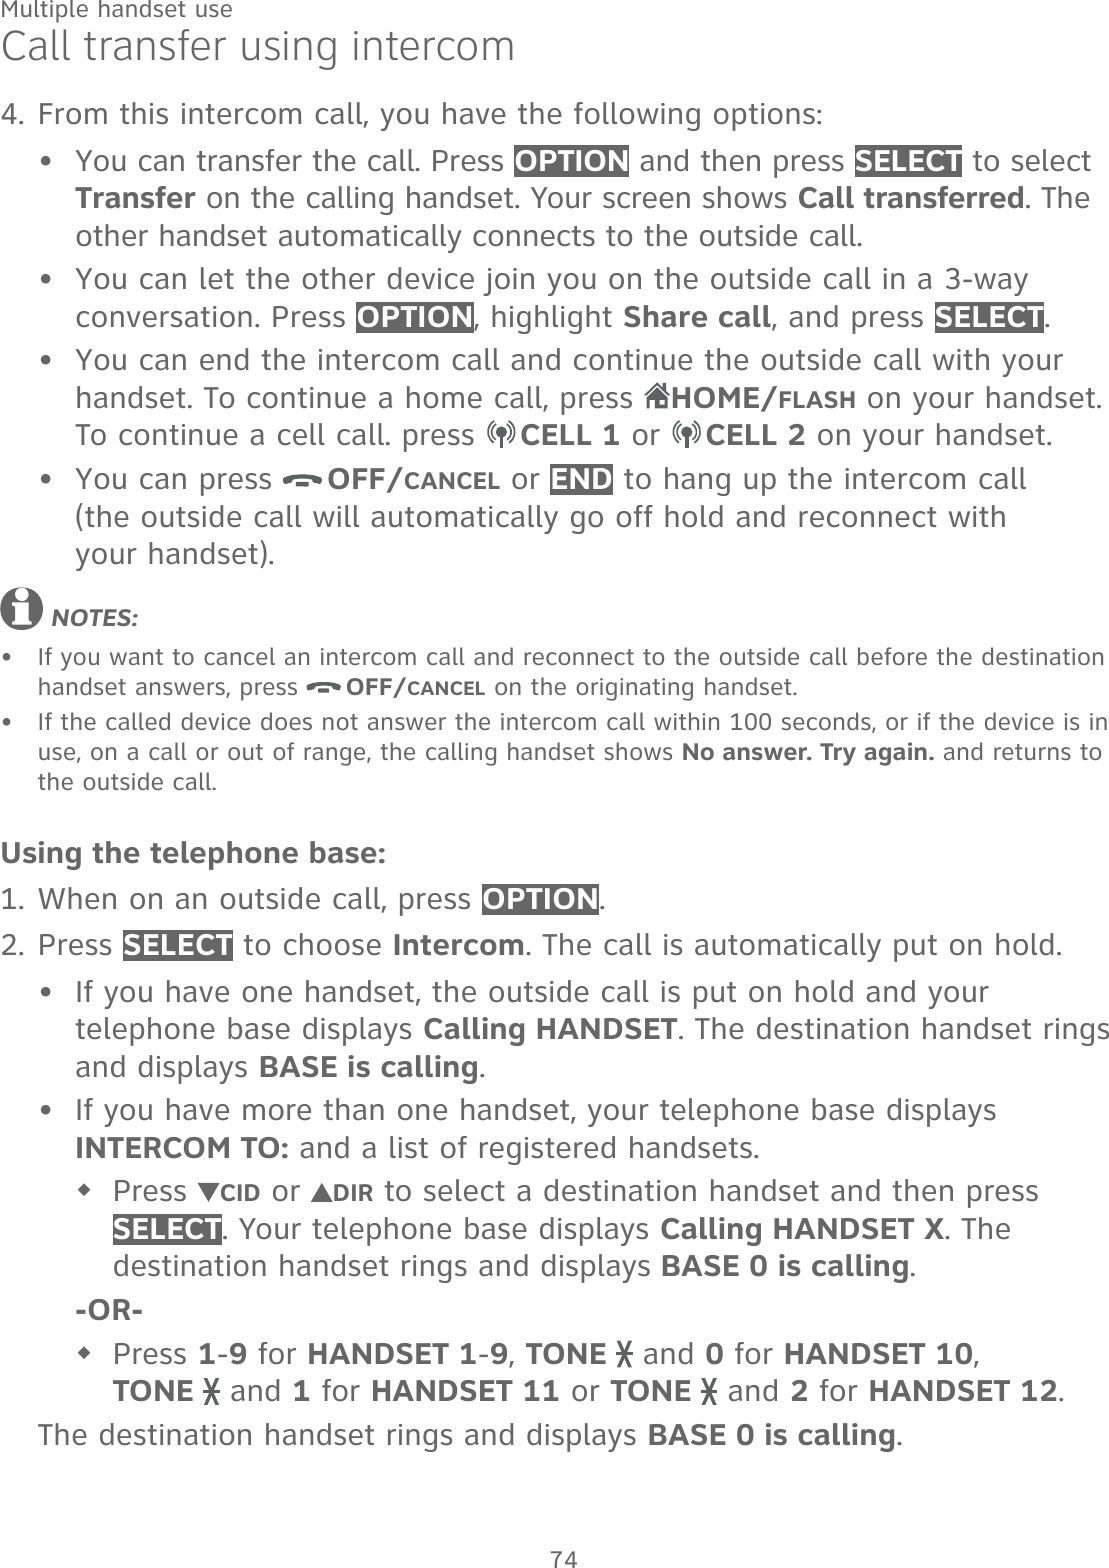 74Multiple handset useCall transfer using intercomFrom this intercom call, you have the following options: You can transfer the call. Press OPTION and then press SELECT to select Transfer on the calling handset. Your screen shows Call transferred. The other handset automatically connects to the outside call. You can let the other device join you on the outside call in a 3-way conversation. Press OPTION, highlight Share call, and press SELECT.You can end the intercom call and continue the outside call with your handset. To continue a home call, press HOME/FLASH on your handset.  To continue a cell call. press  CELL 1 or  CELL 2 on your handset.You can press  OFF/CANCEL or END to hang up the intercom call  (the outside call will automatically go off hold and reconnect with  your handset). NOTES: If you want to cancel an intercom call and reconnect to the outside call before the destination handset answers, press  OFF/CANCEL on the originating handset.If the called device does not answer the intercom call within 100 seconds, or if the device is in use, on a call or out of range, the calling handset shows No answer. Try again. and returns to the outside call.Using the telephone base:When on an outside call, press OPTION.Press SELECT to choose Intercom. The call is automatically put on hold.If you have one handset, the outside call is put on hold and your telephone base displays Calling HANDSET. The destination handset rings and displays BASE is calling.If you have more than one handset, your telephone base displays  INTERCOM TO: and a list of registered handsets.Press  CID or  DIR to select a destination handset and then press SELECT. Your telephone base displays Calling HANDSET X. The destination handset rings and displays BASE 0 is calling.-OR-Press 1-9 for HANDSET 1-9, TONE   and 0 for HANDSET 10,  TONE   and 1 for HANDSET 11 or TONE   and 2 for HANDSET 12.The destination handset rings and displays BASE 0 is calling.4.••••••1.2.••